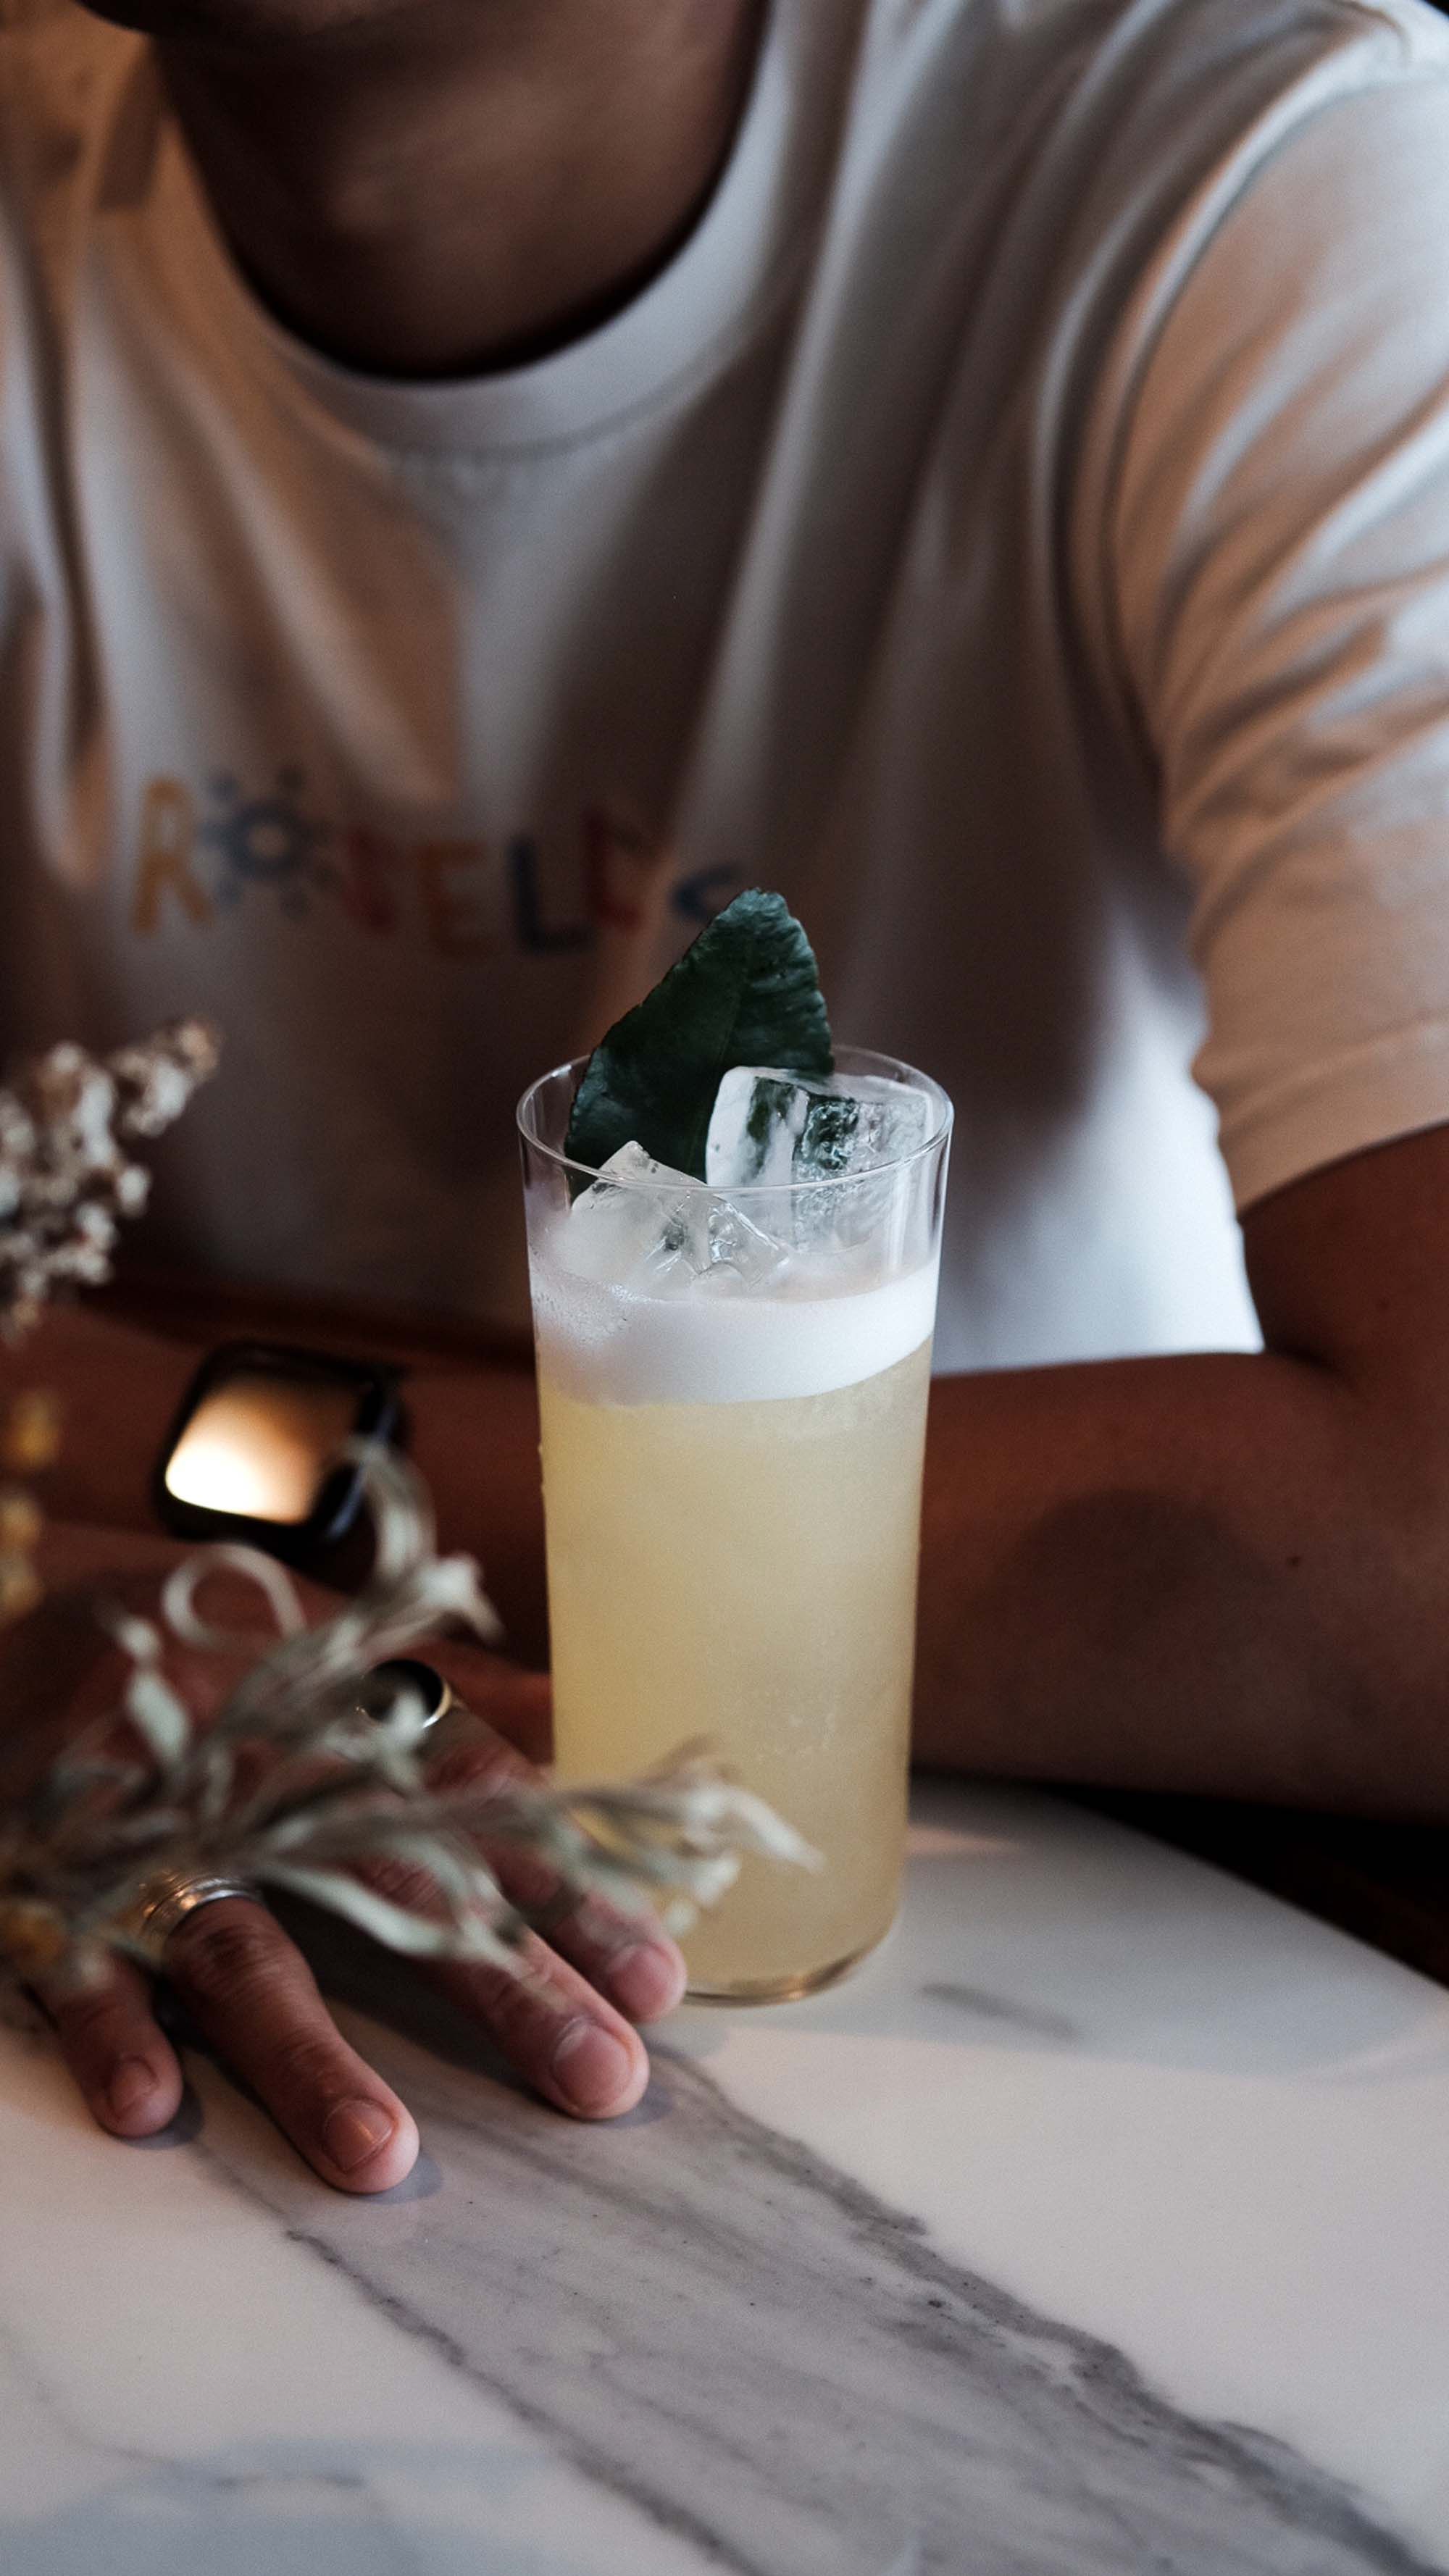 Take a look at the Chris Hempsworth cocktail & Rosella's new list